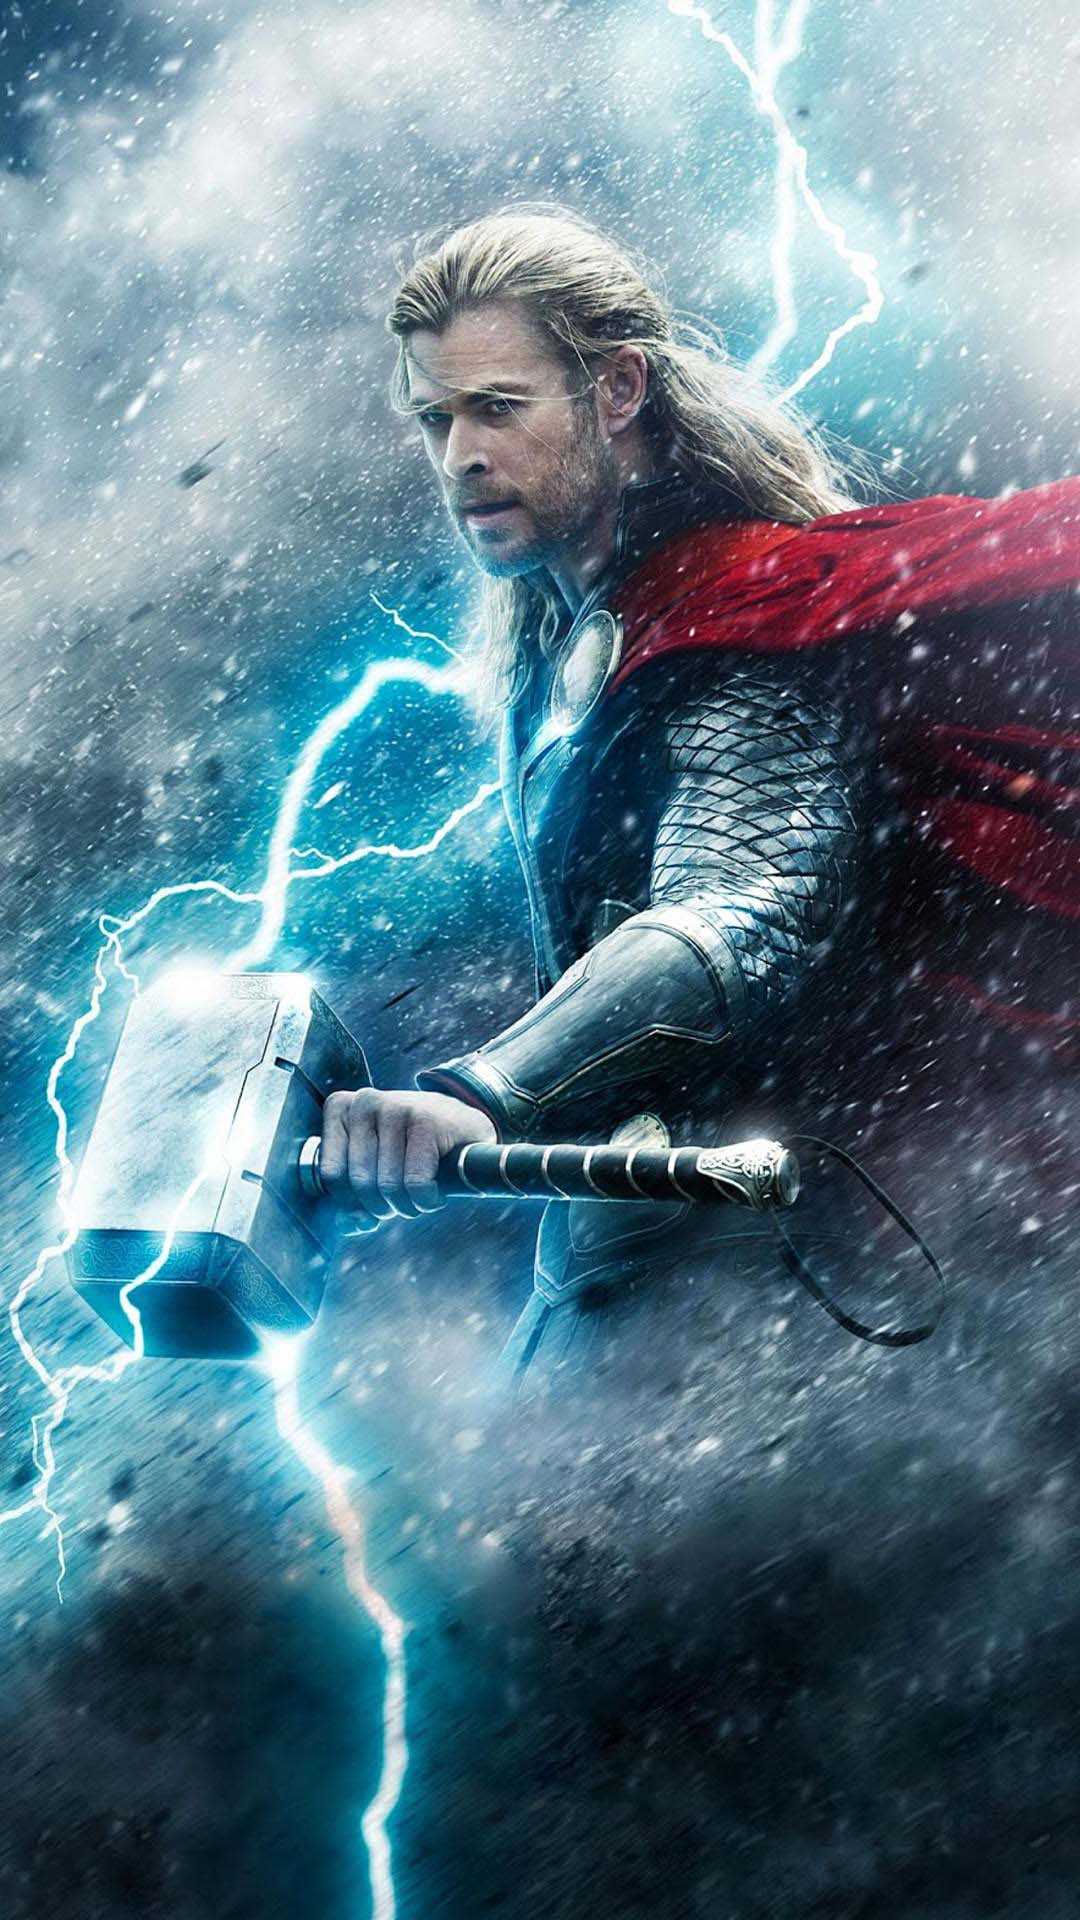 Thor HD Avengers Endgame Wallpapers | HD Wallpapers | ID #93124